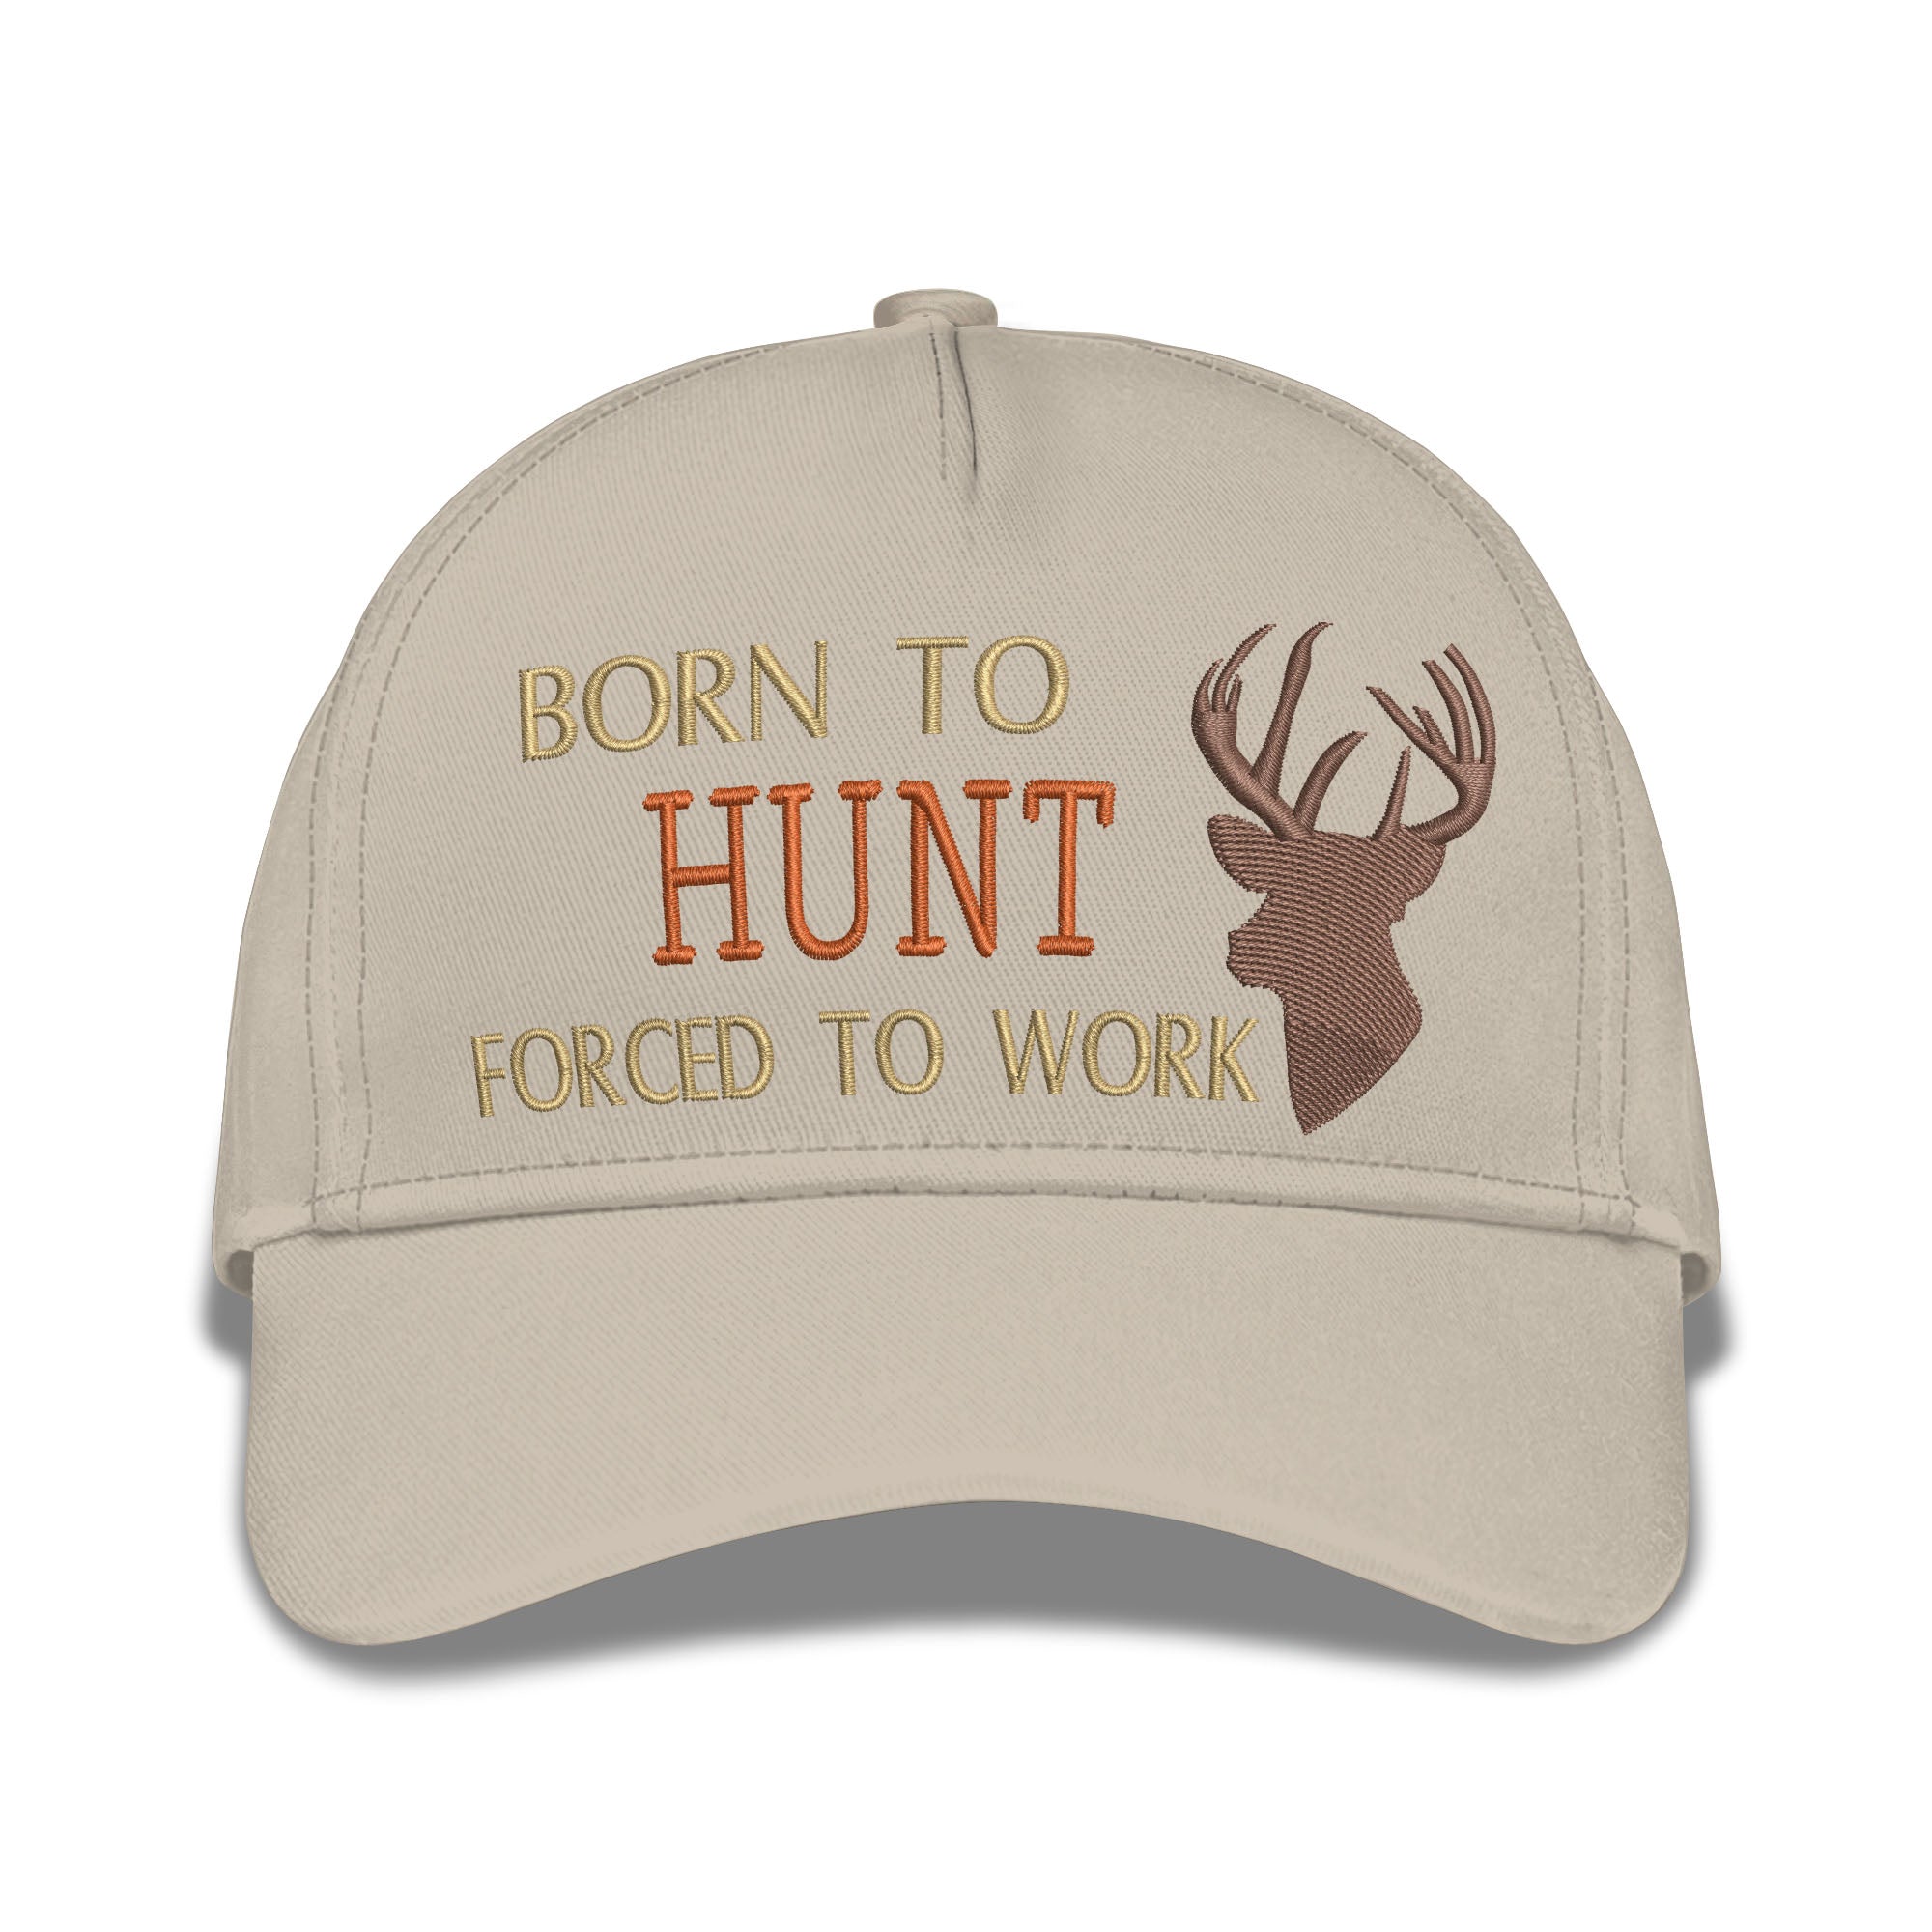 Born To Hunt Forced To Work Embroidered Baseball Caps